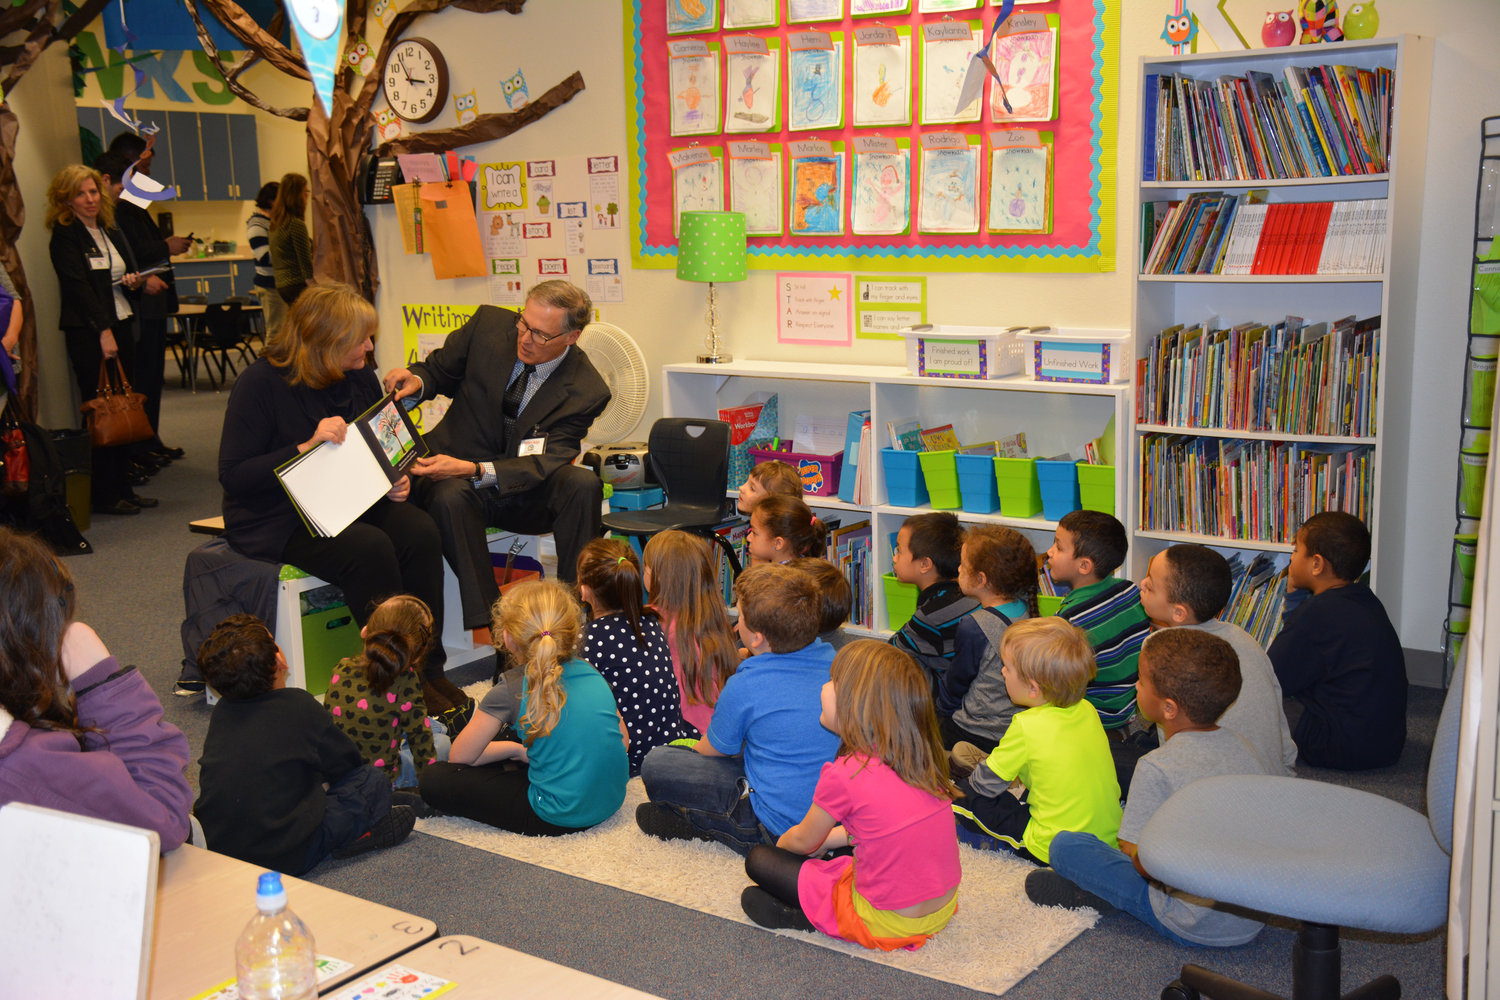 Gov. Jay Inslee, seated on bench, reads a children's book he wrote to a group of young students at Fort Stevens Elementary School in Yelm Thursday, Feb. 5 with the help of his wife, Trudi. The governor visted Fort Stevens and Yelm High School to learn about their successful early learning and career and technical education programs he would like to make available statewide.